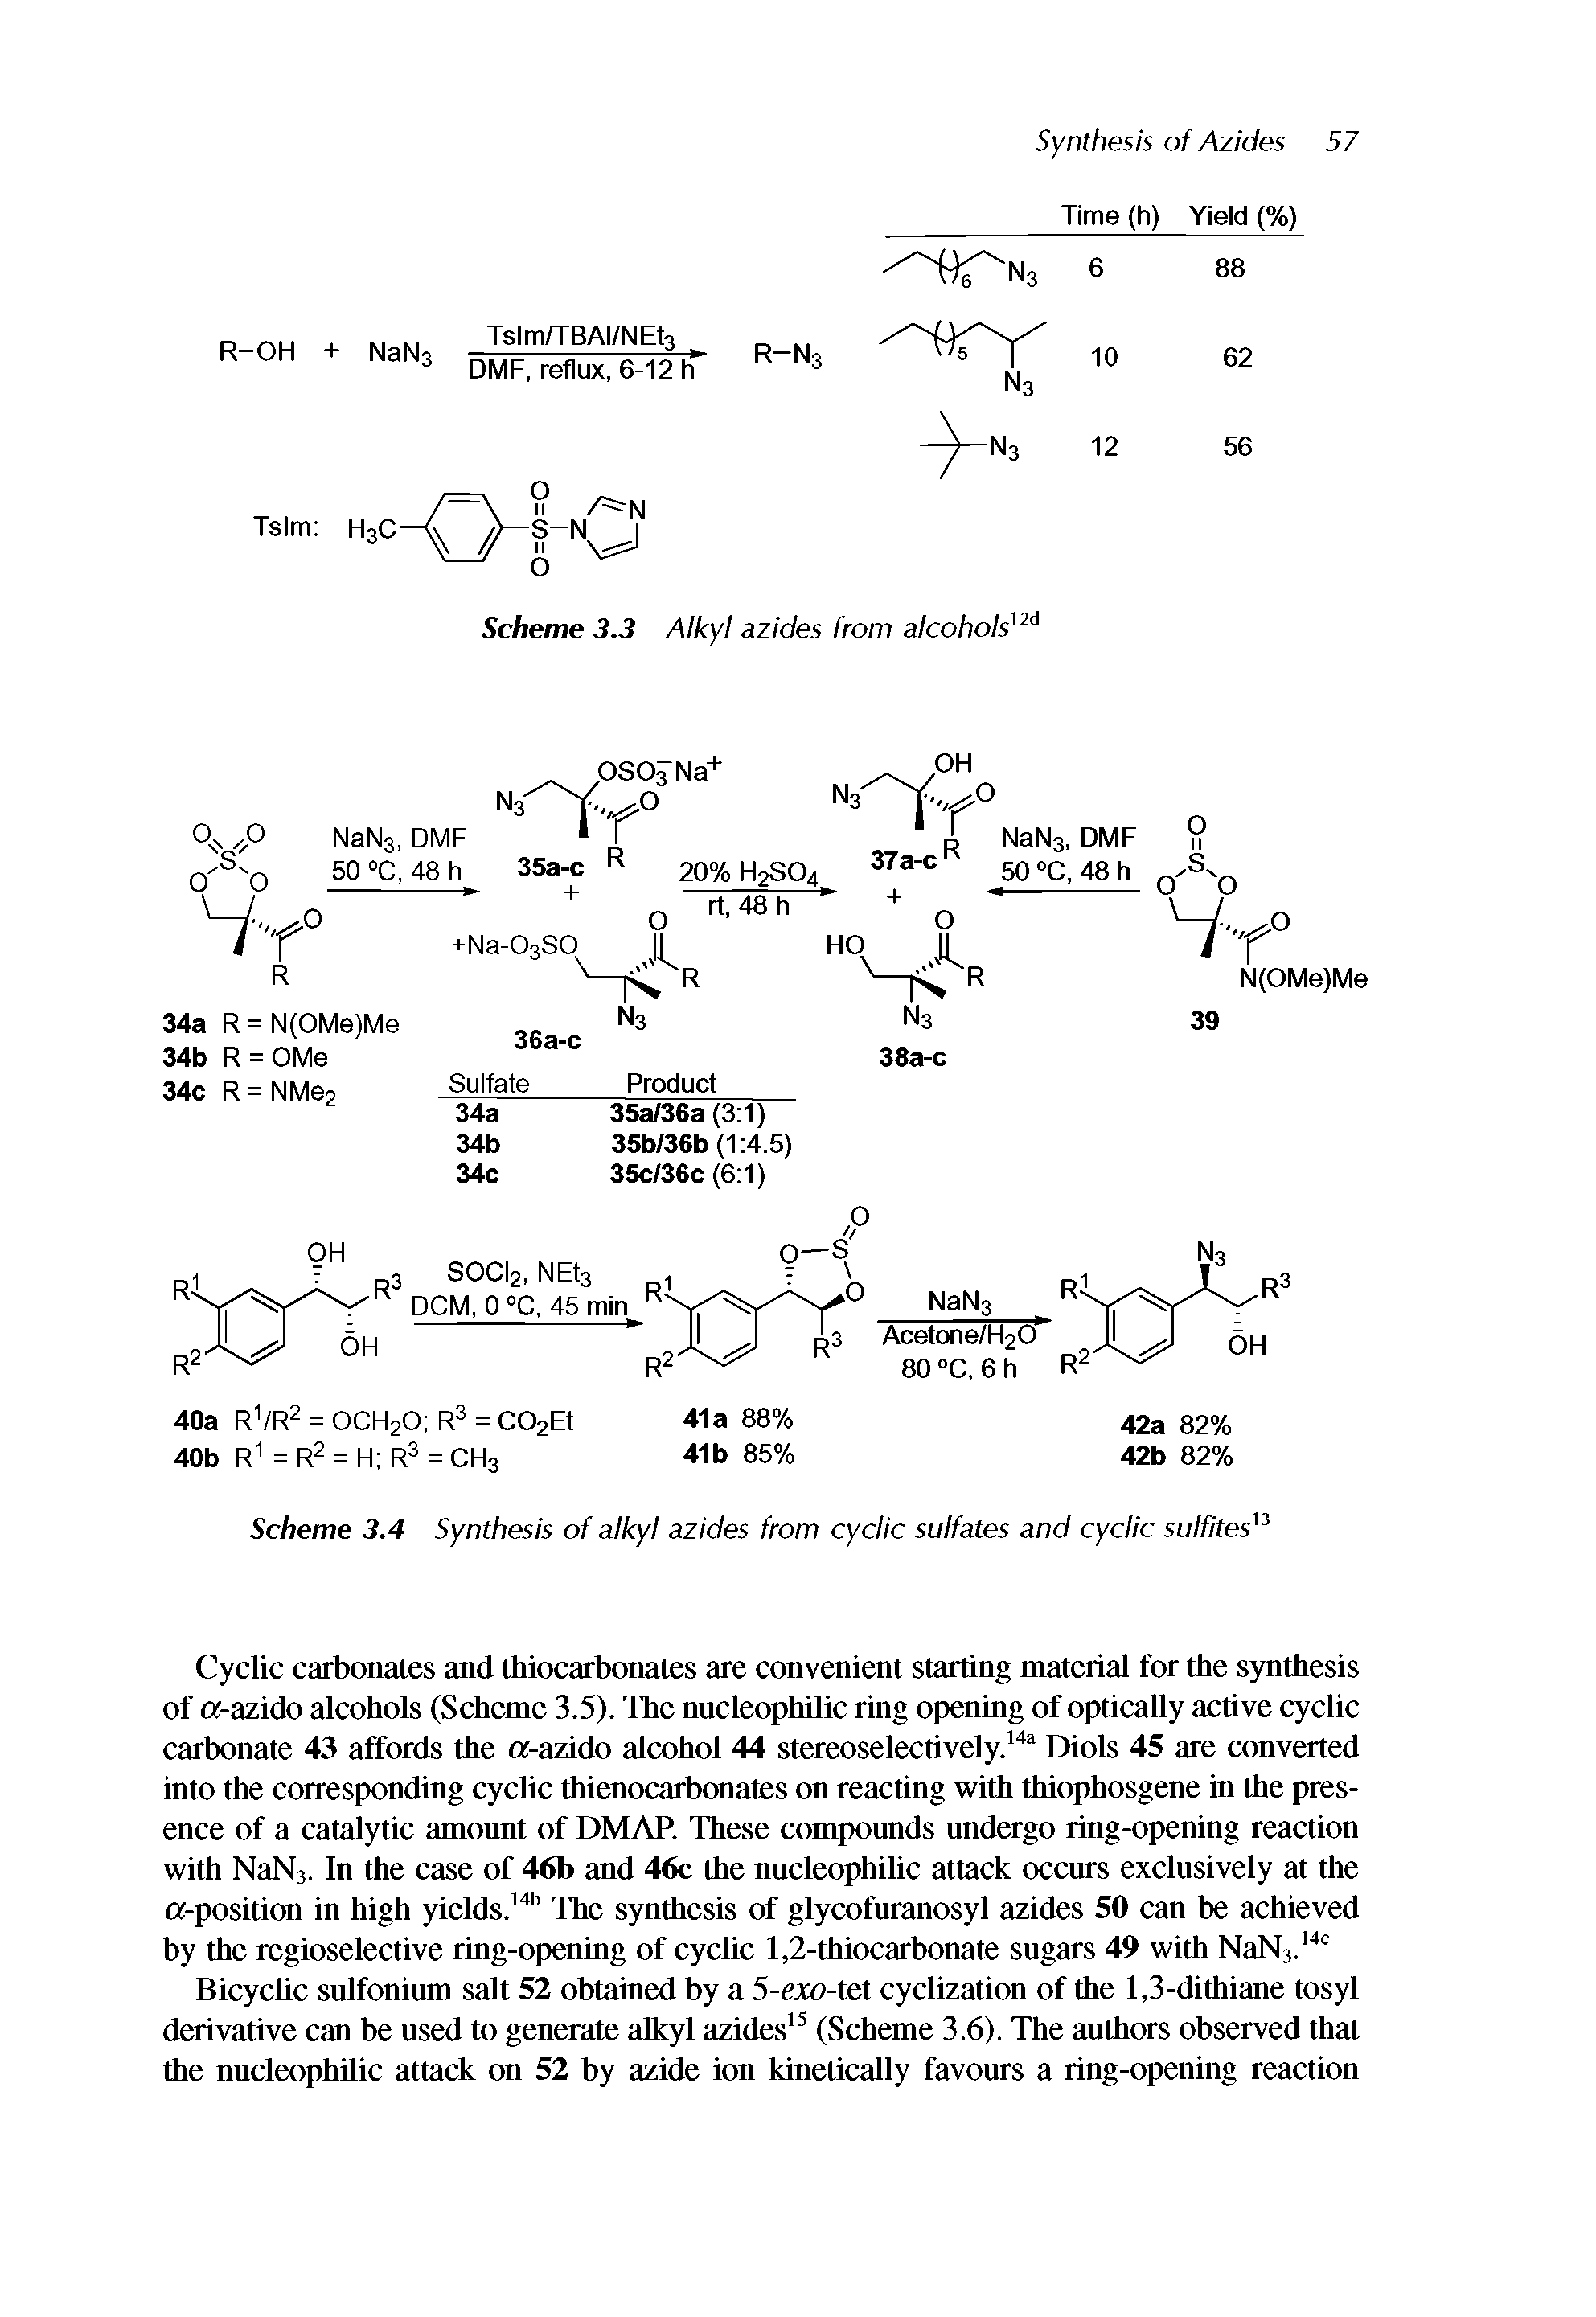 Scheme 3.4 Synthesis of alkyl azides from cyclic sulfates and cyclic sulfites ...